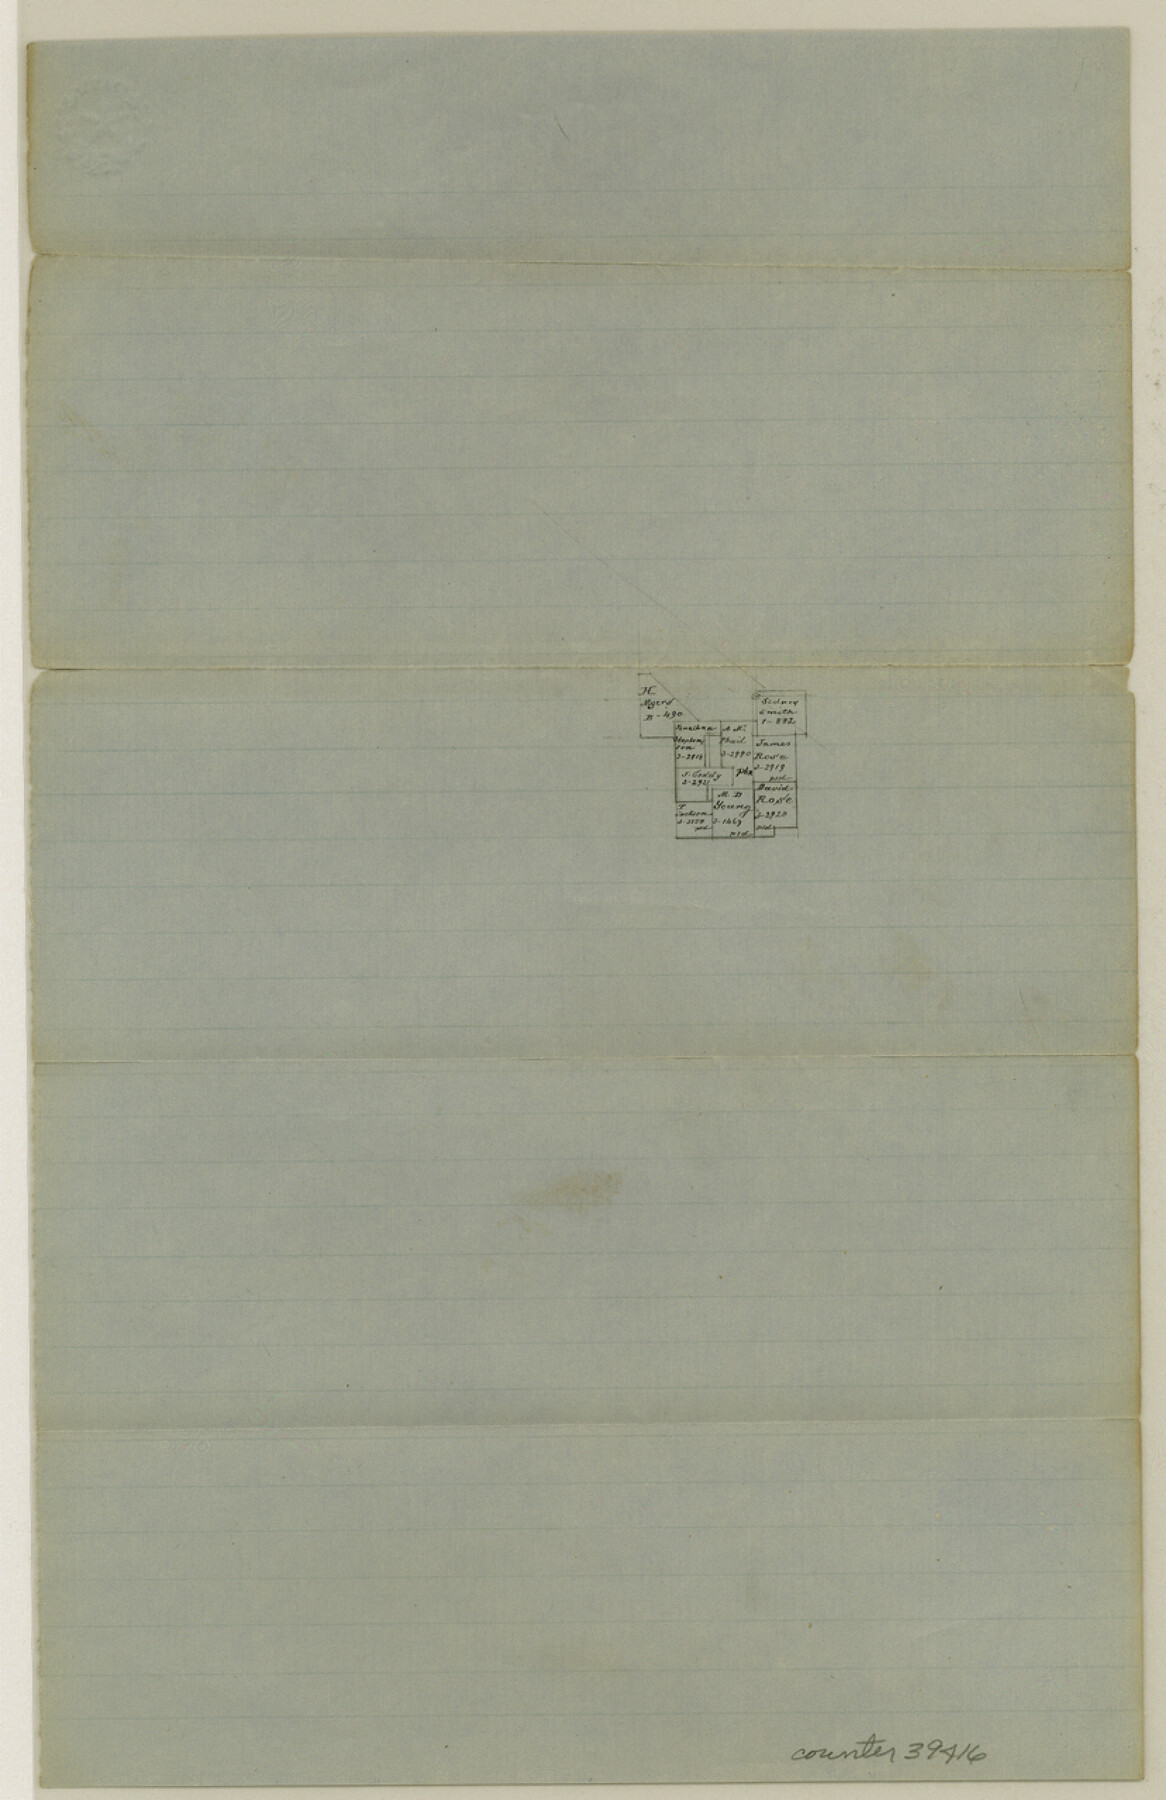 39416, Van Zandt County Sketch File 16b, General Map Collection